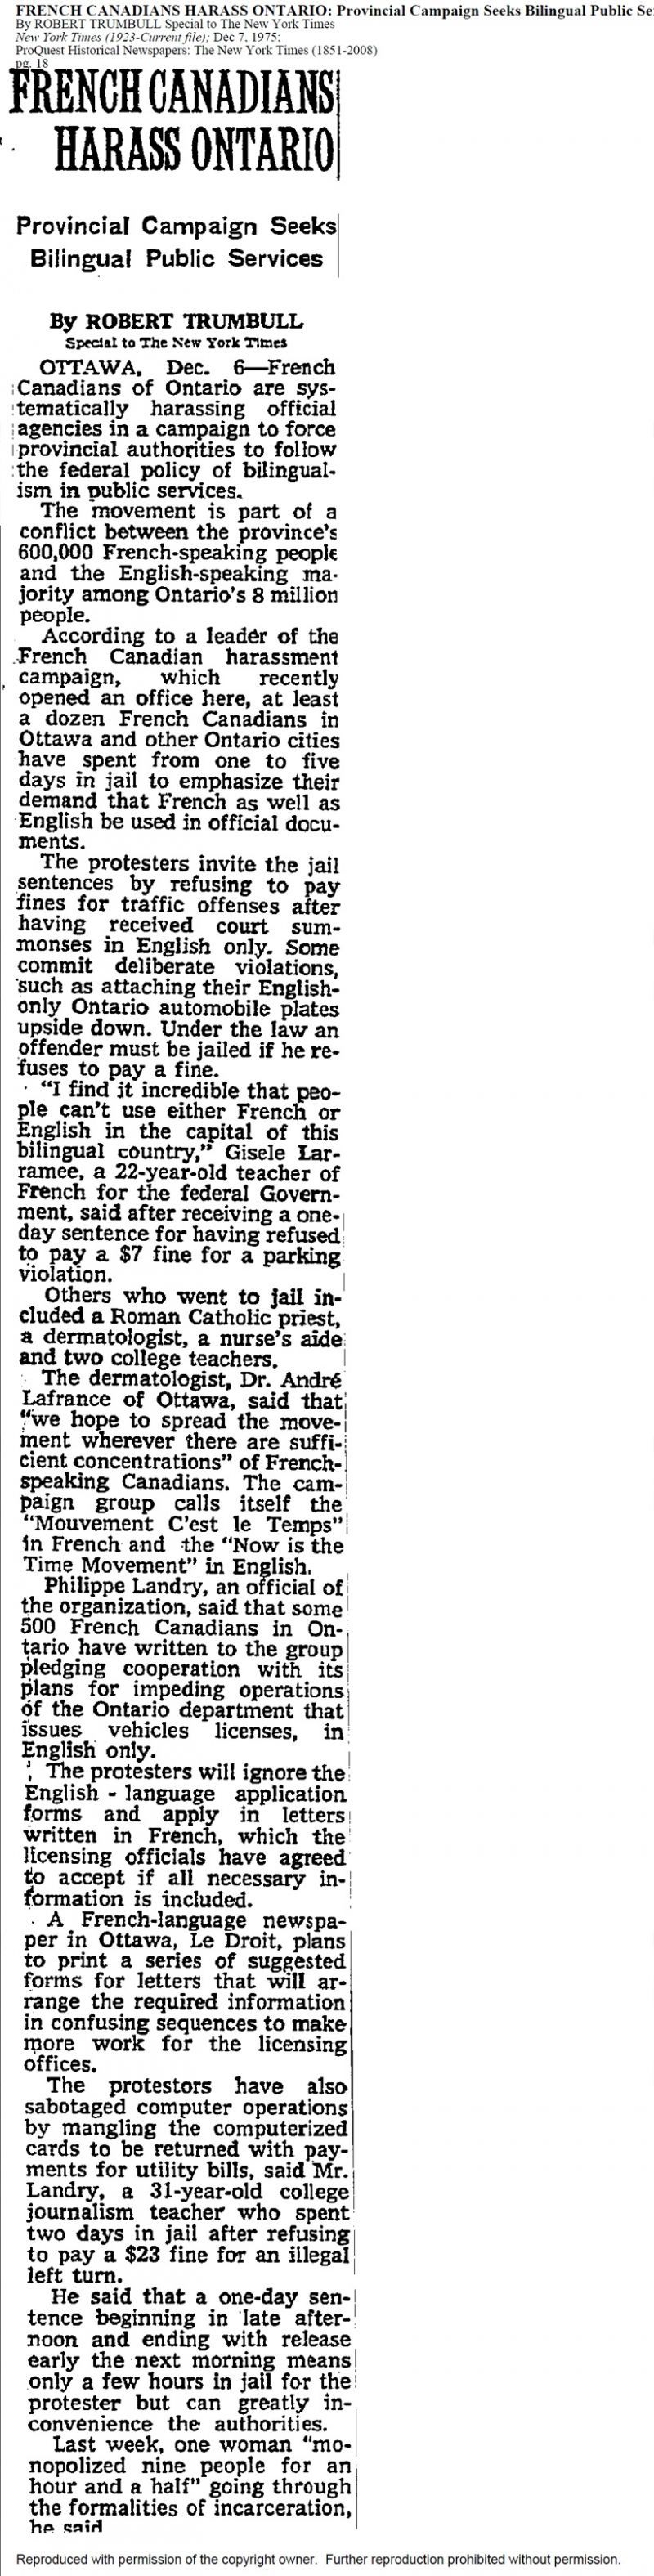 Newspaper article written in English, arranged in a long single column. The title appears in uppercase and bold. The article is signed and dated. Typed in small characters above the title of the article, in database style: the title, author name, and source of the article.